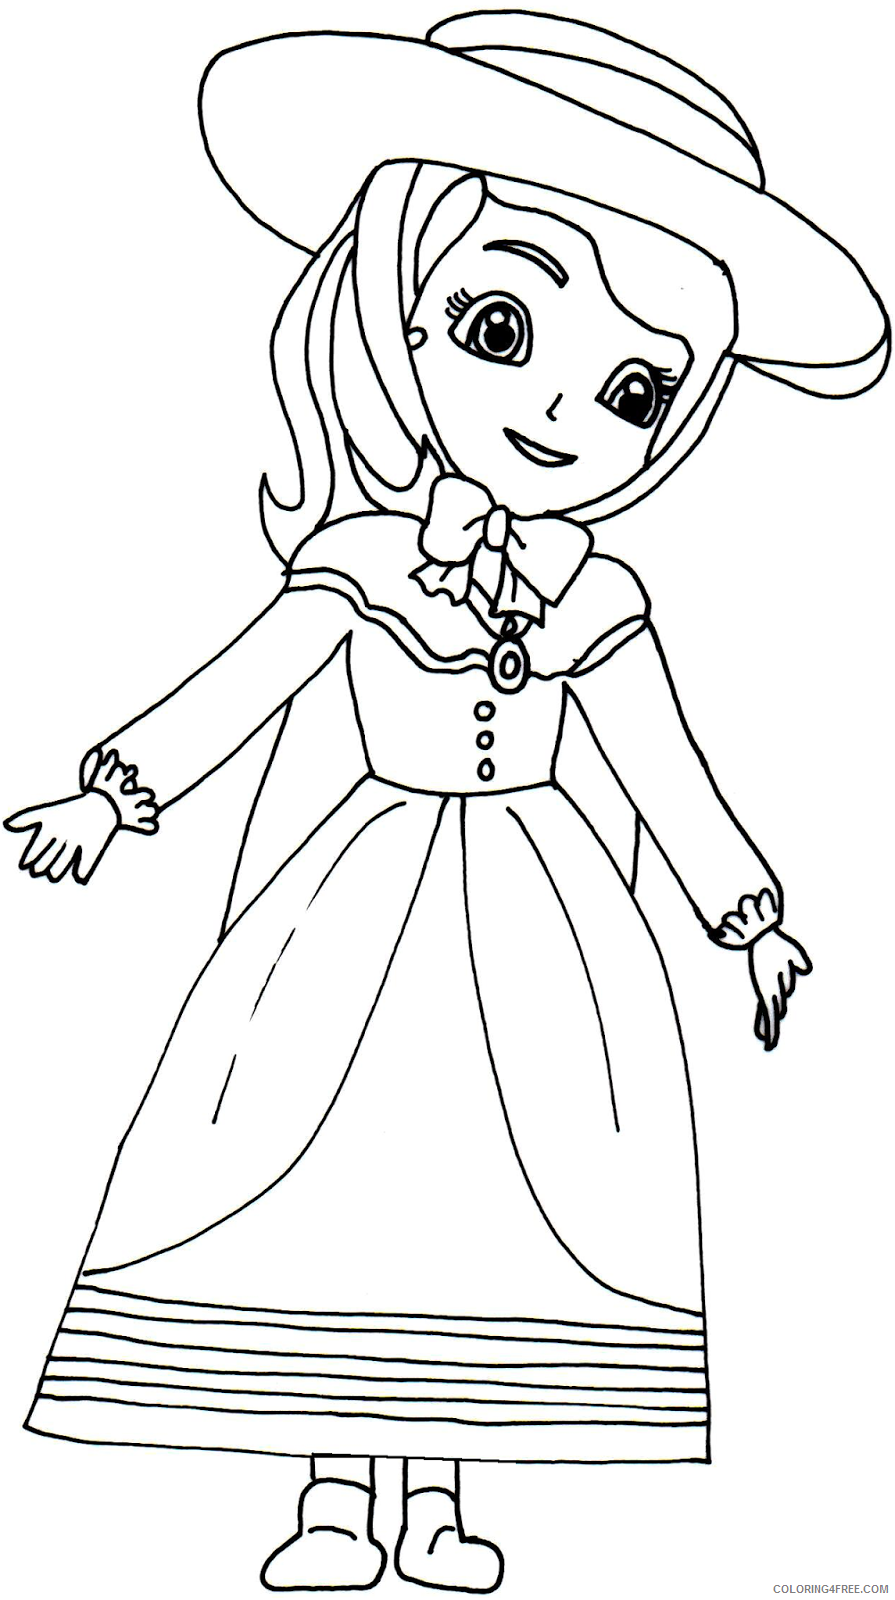 princess sofia coloring pages aunt tilly Coloring4free